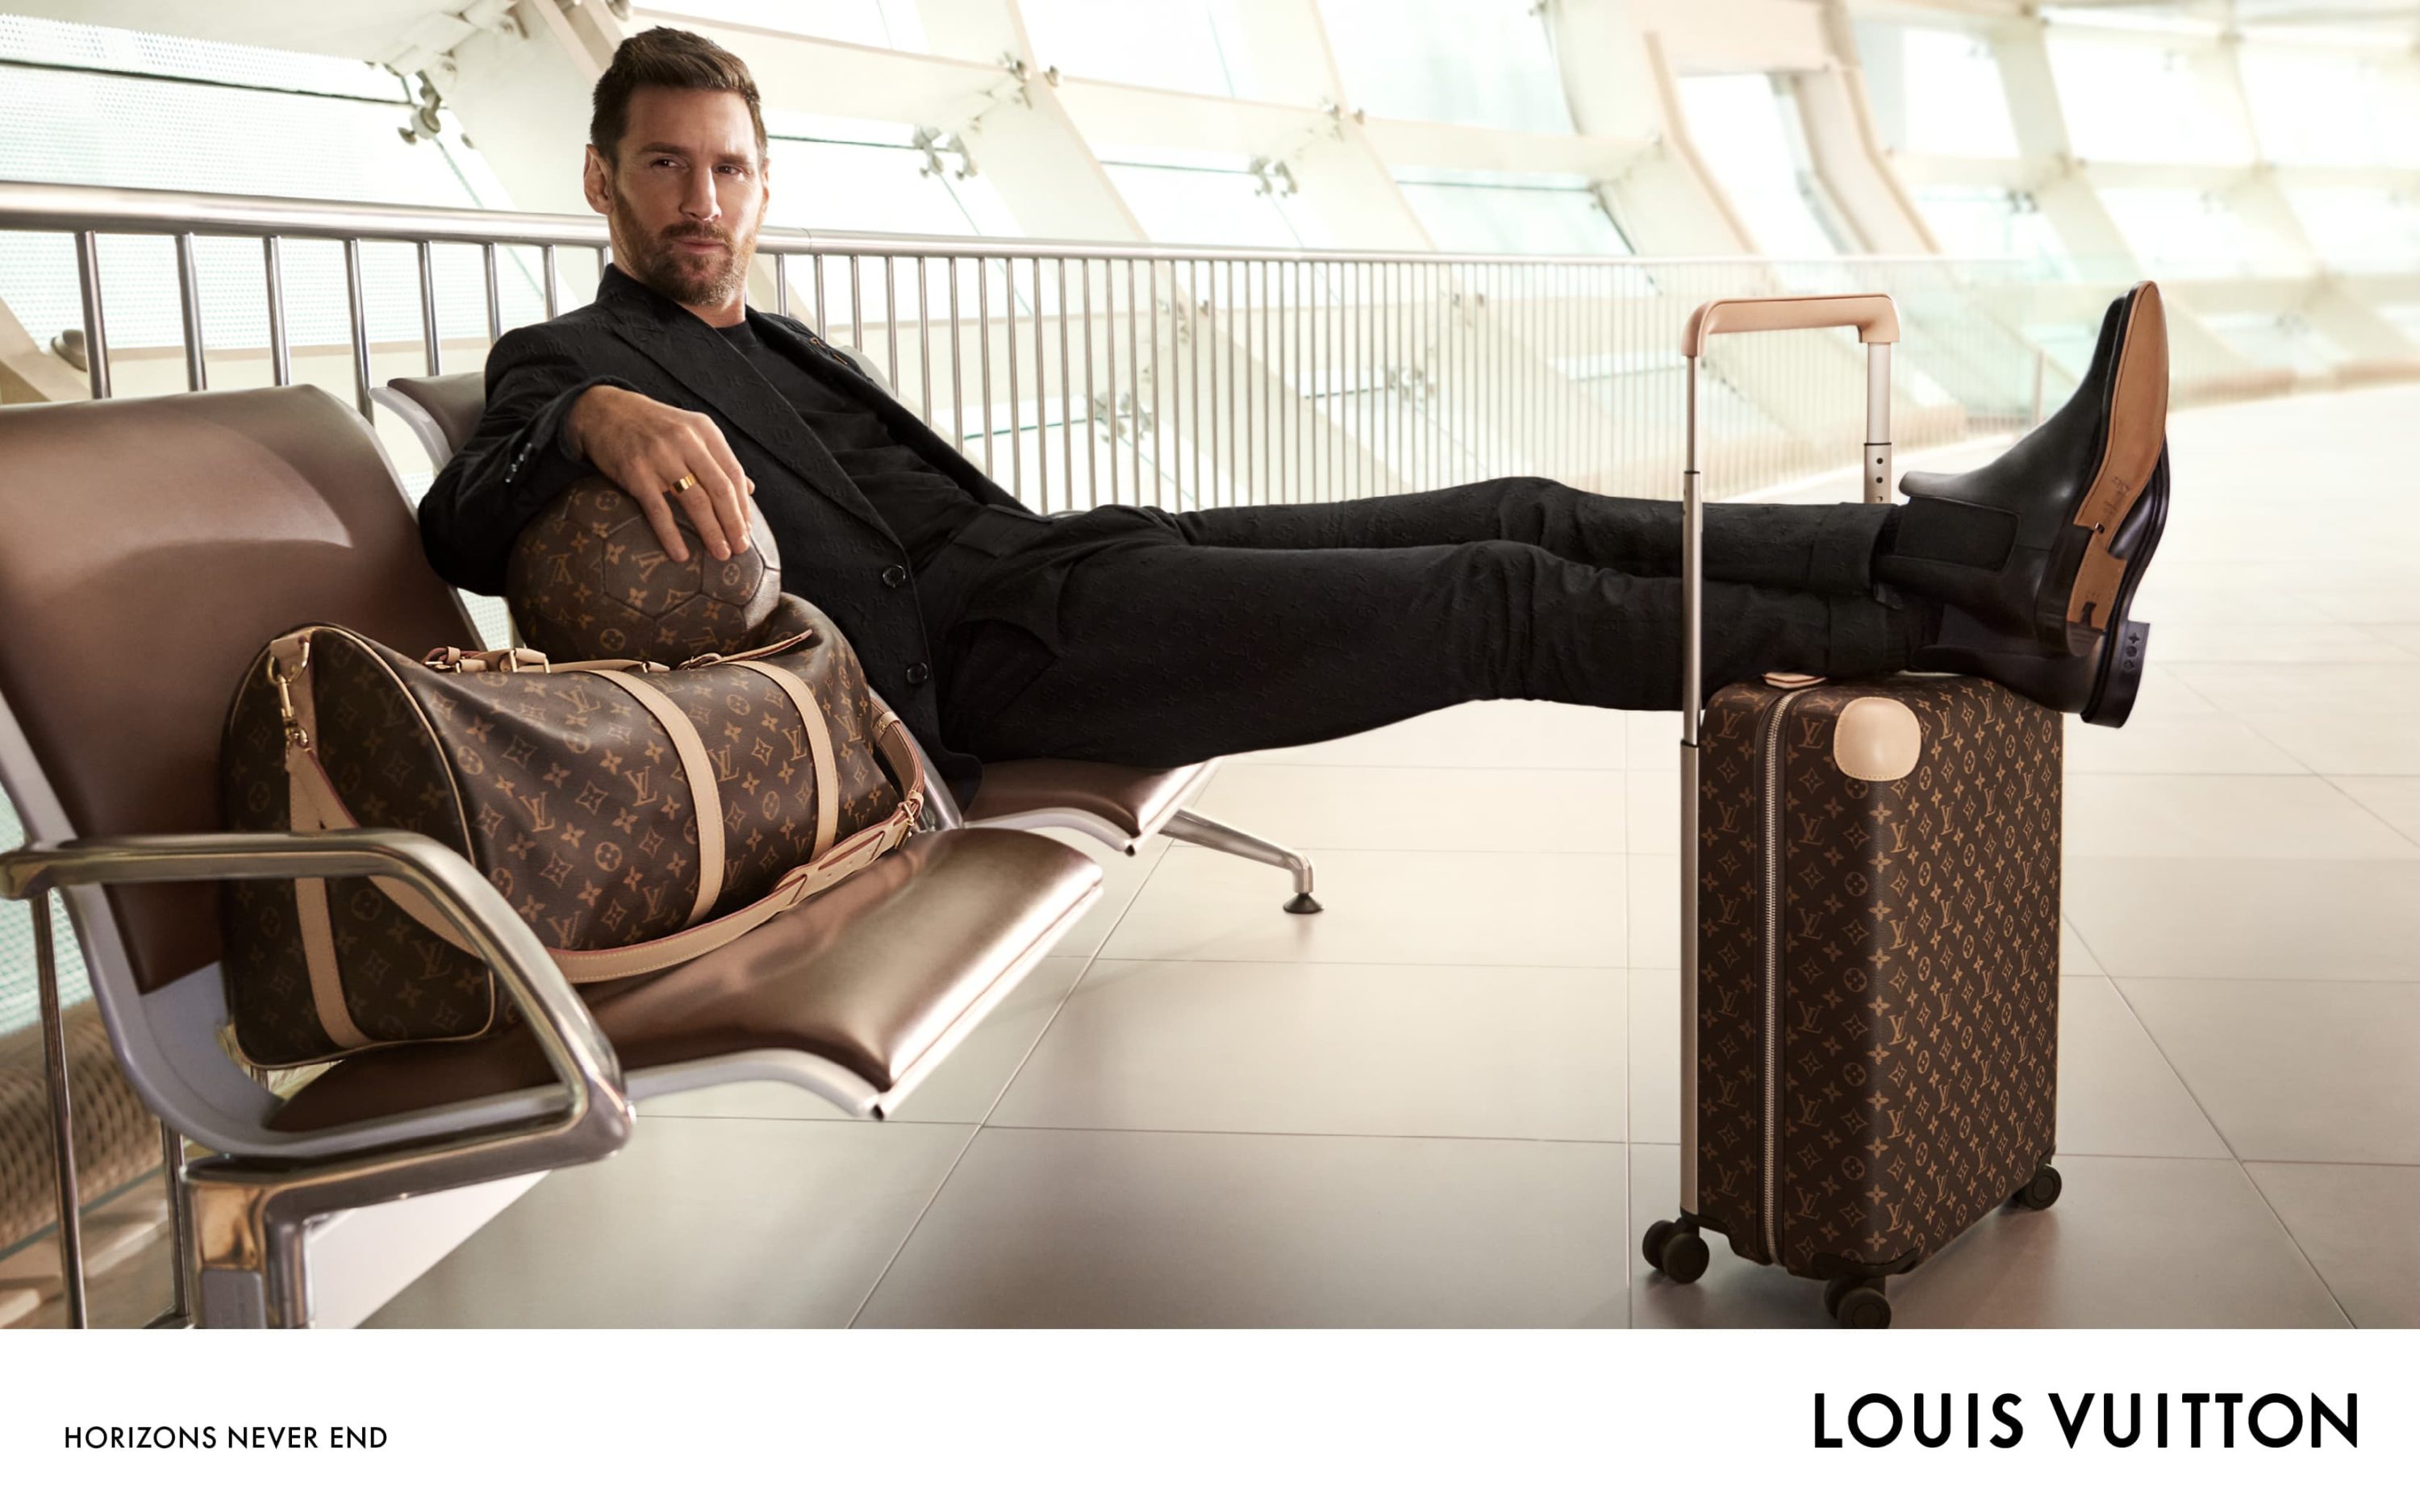 Lionel Messi stars in the new Louis Vuitton “Horizons never end